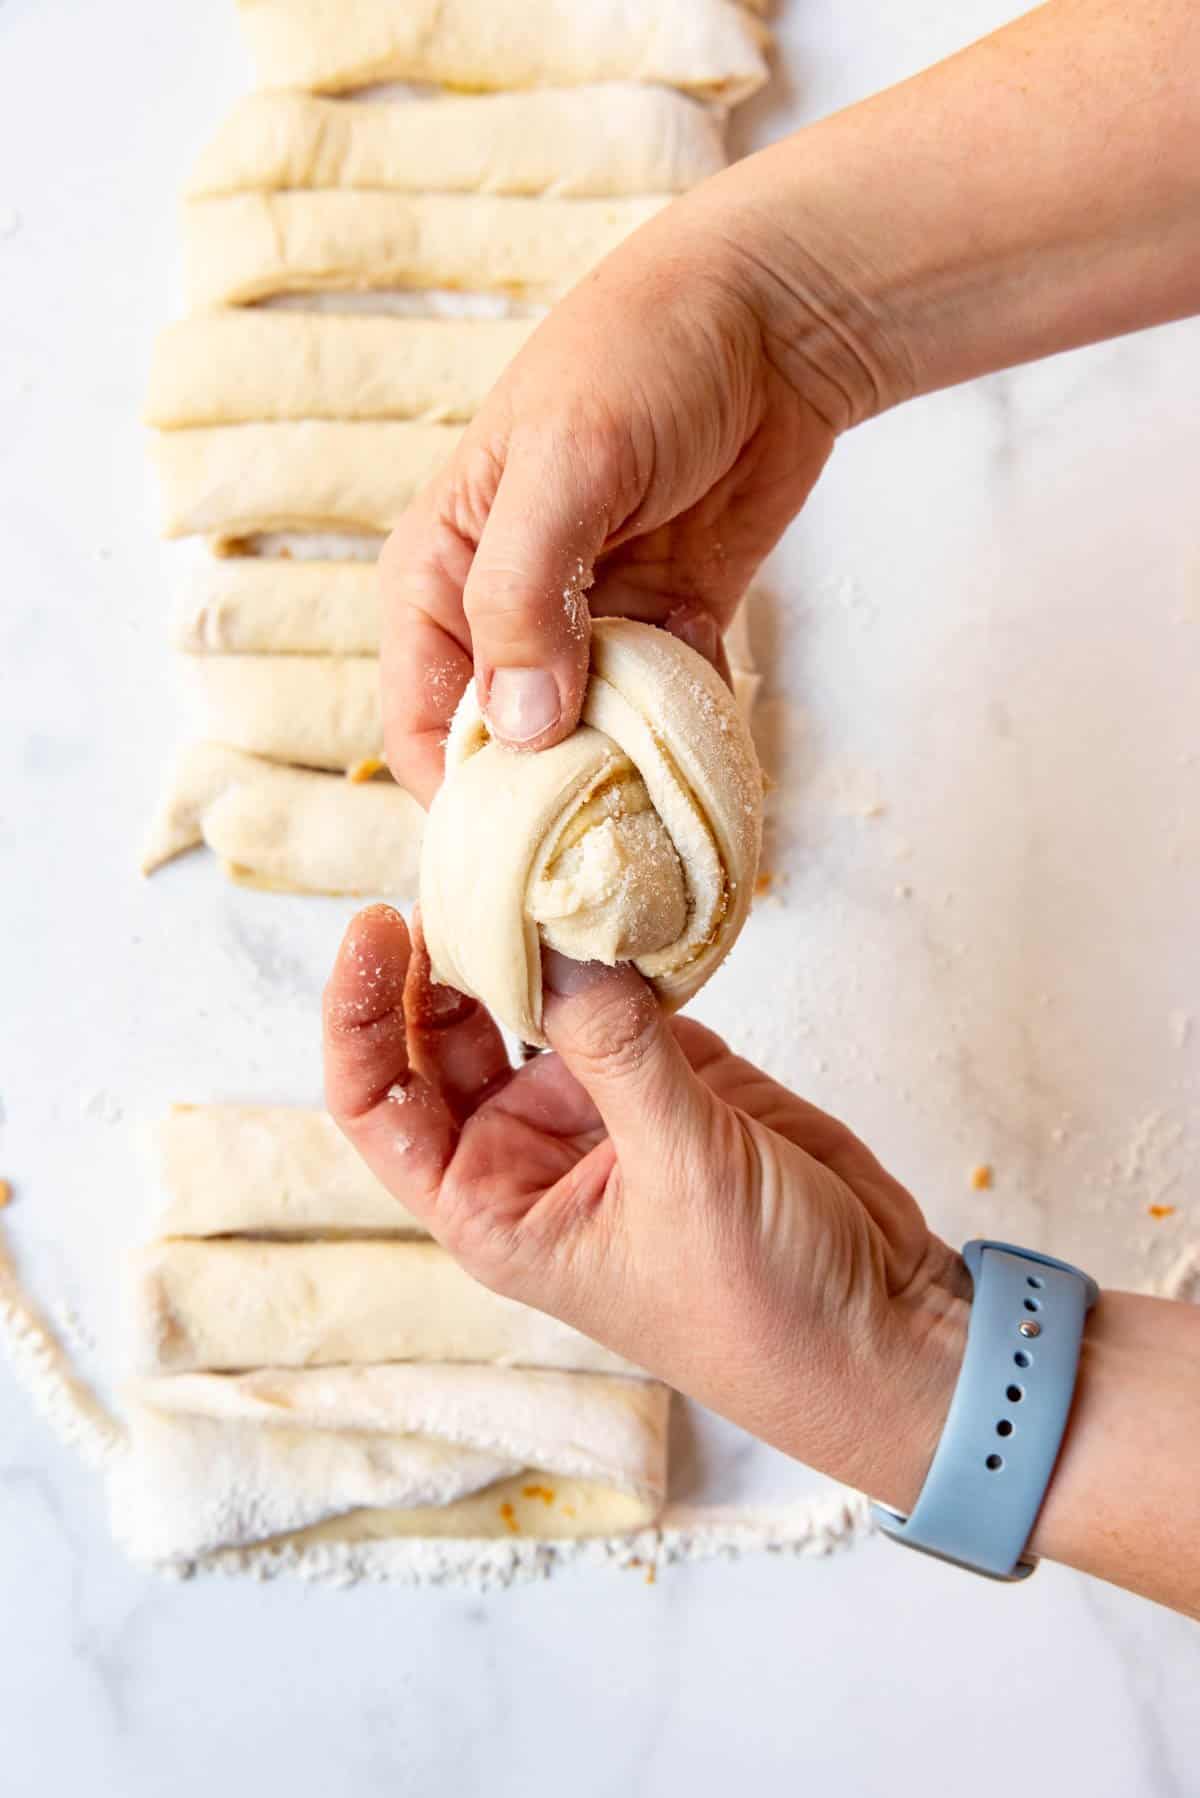 Pushing one end of dough through a loop to make a knotted orange sweet roll.